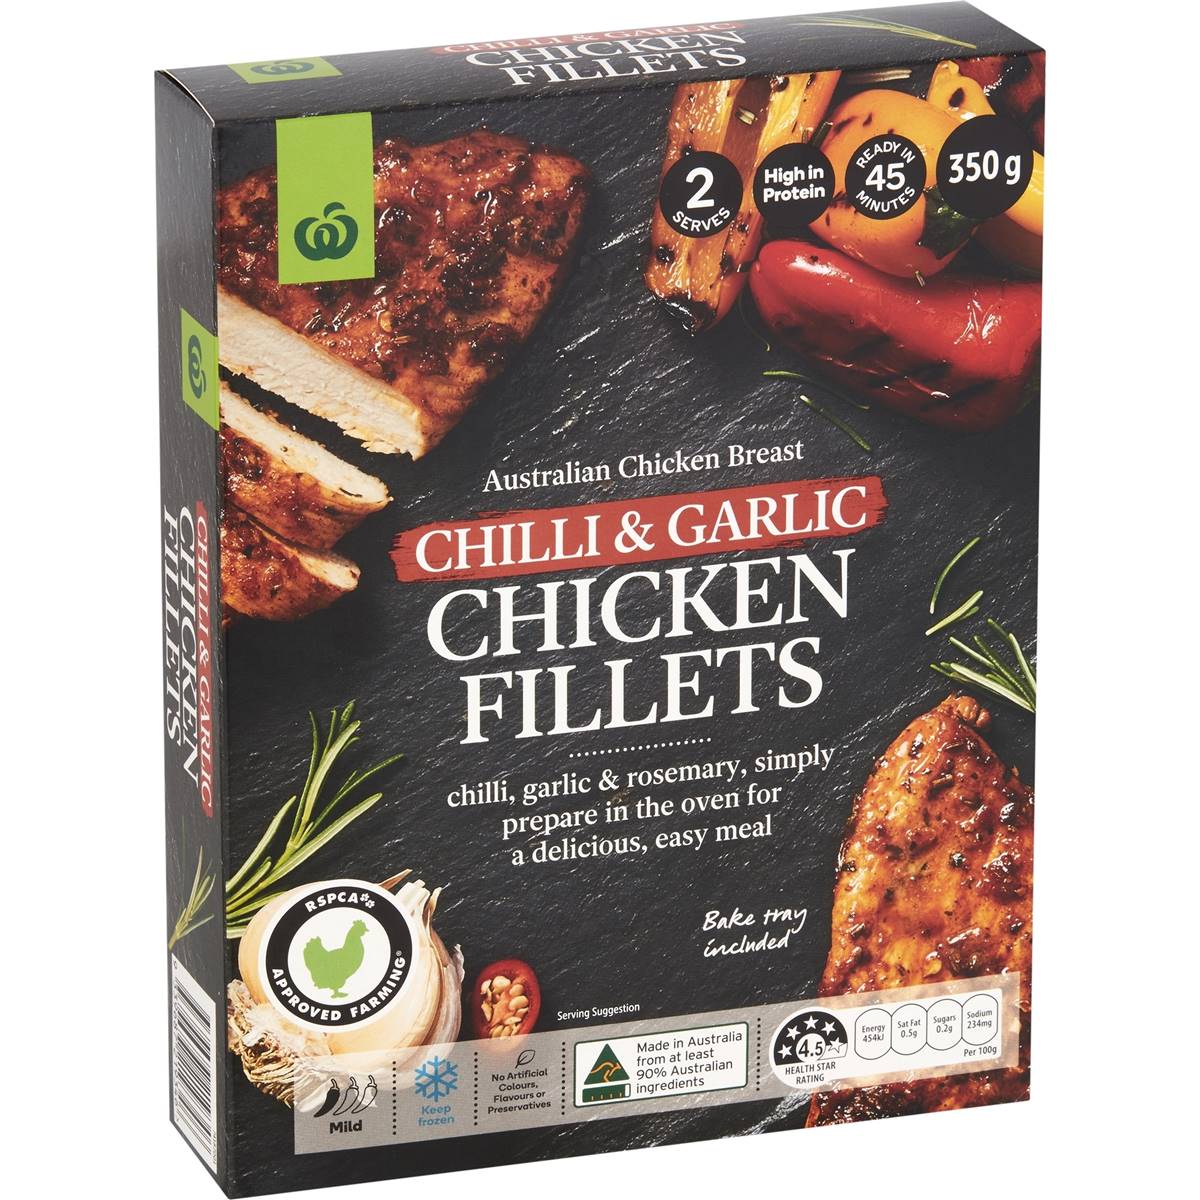 Calories in Woolworths Chicken Breast Fillets Chilli & Garlic